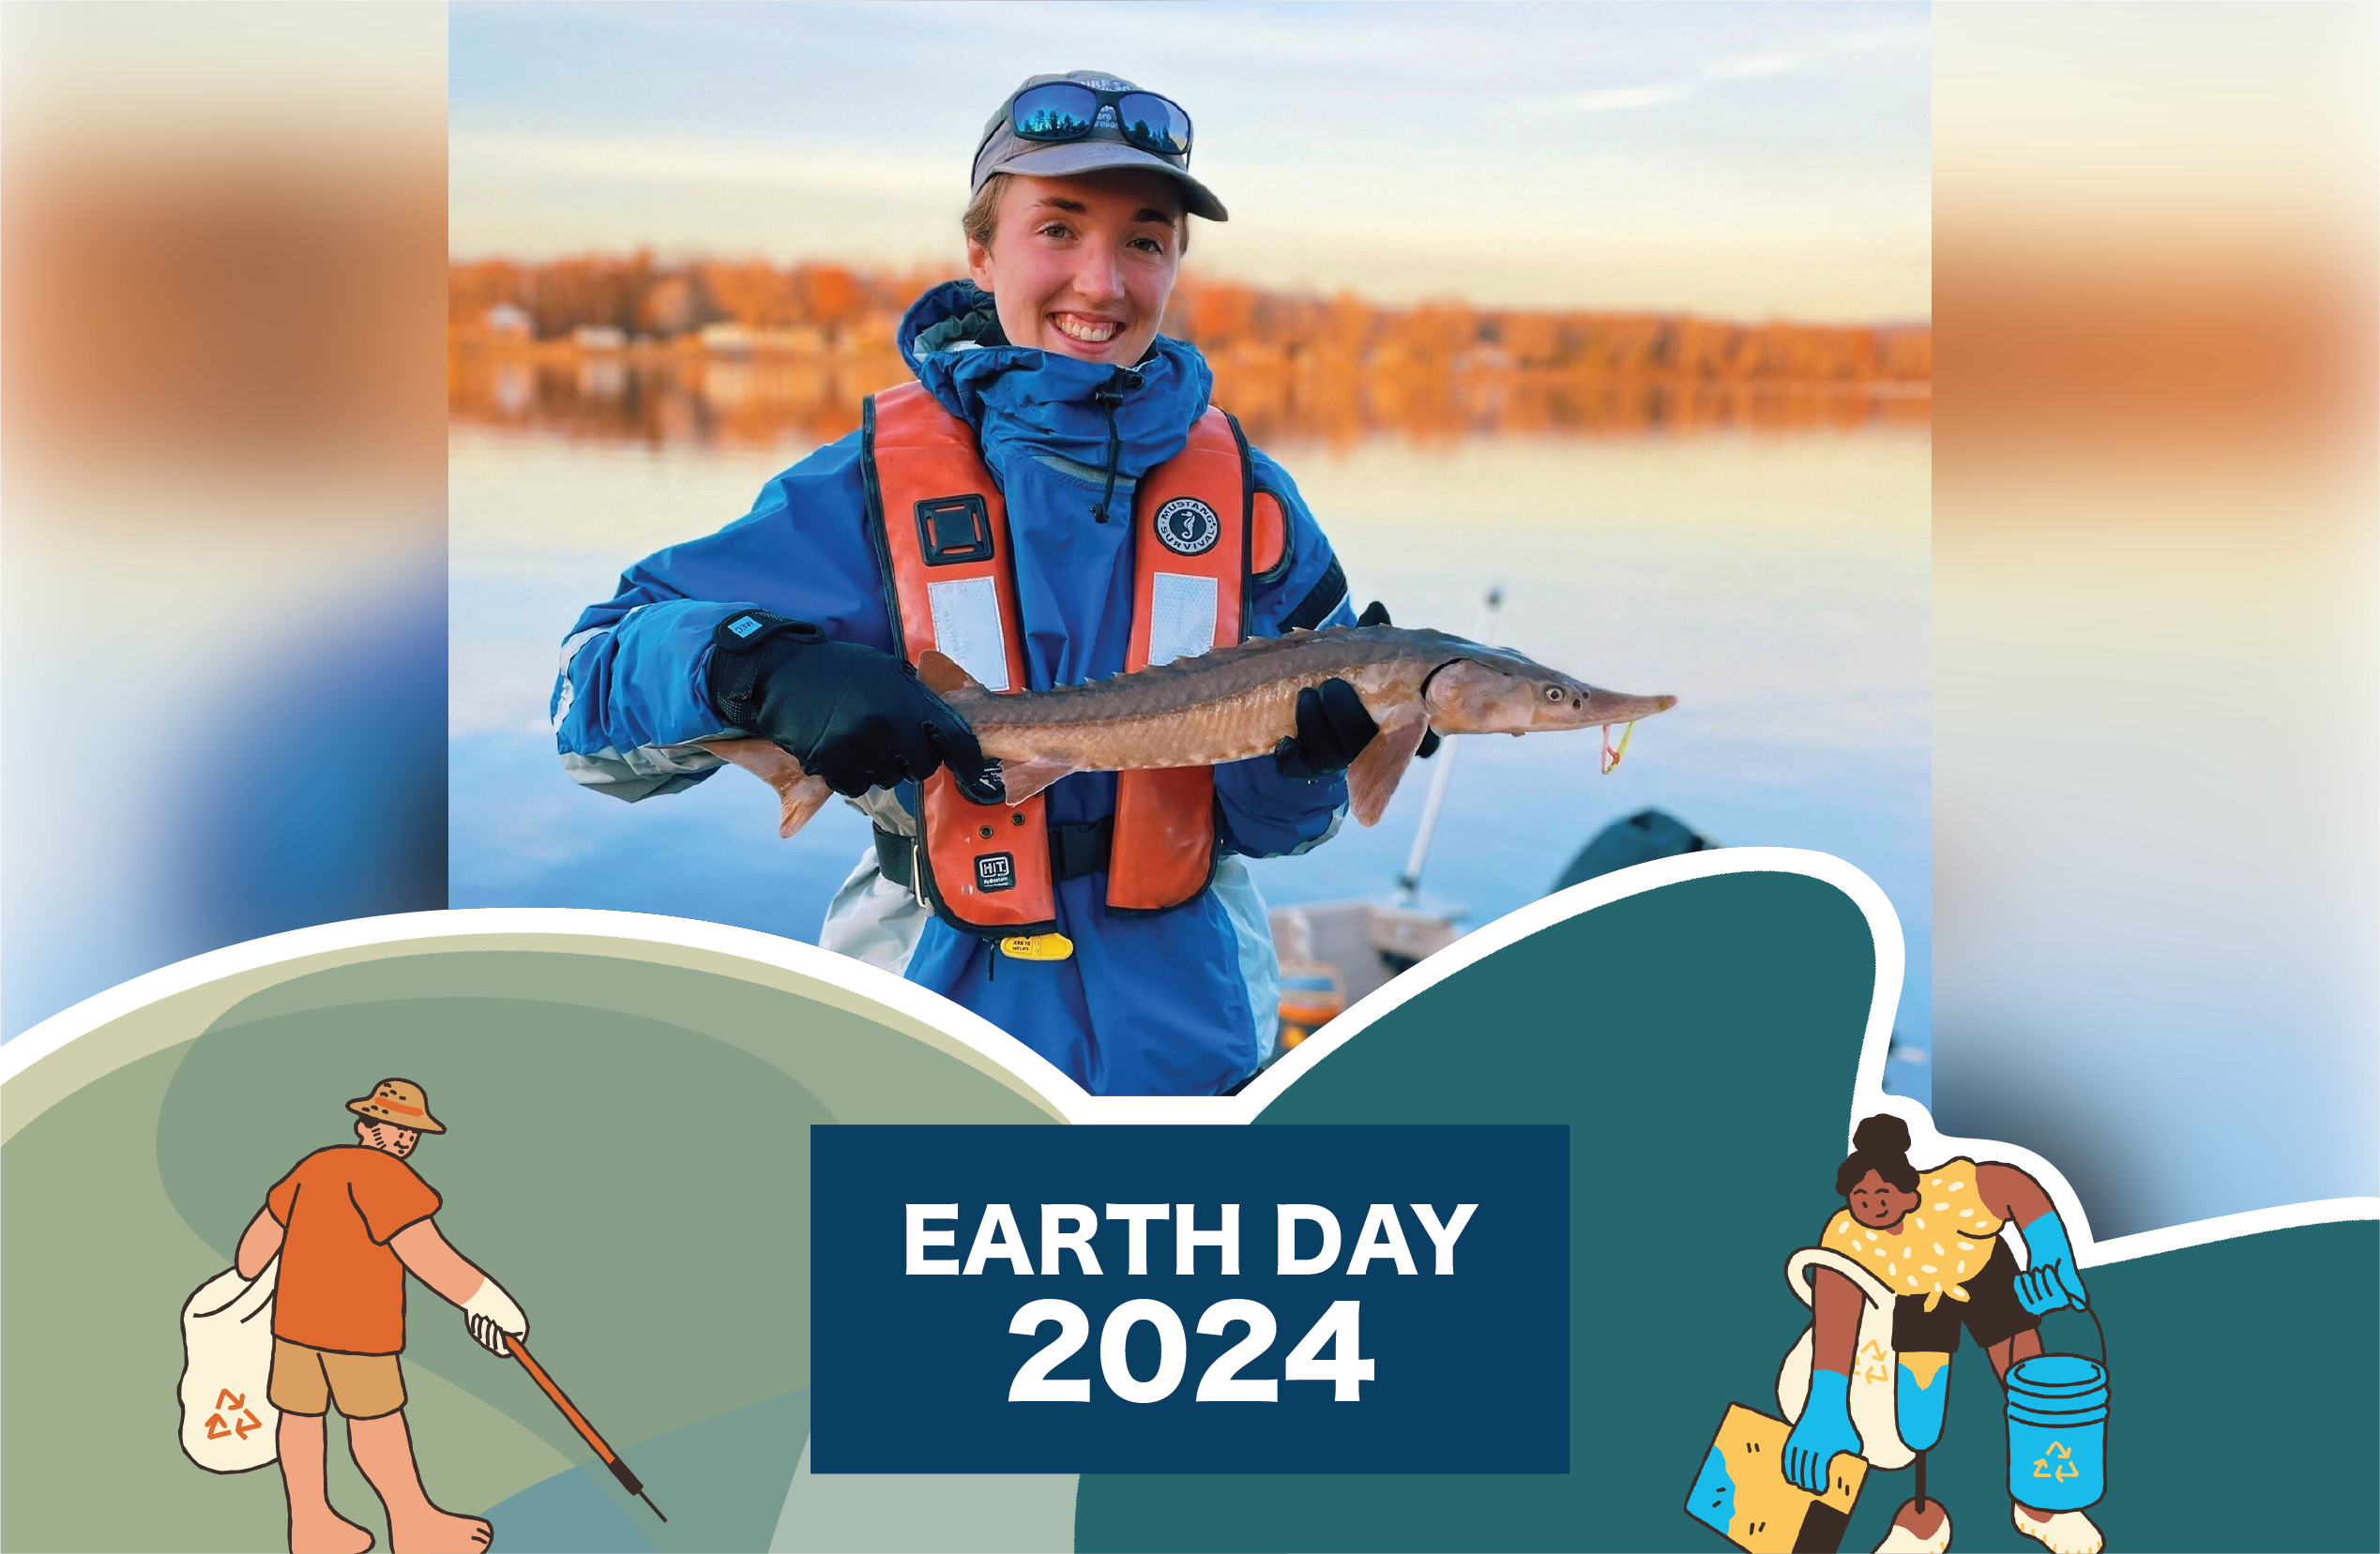 Woman wearing lifevest holding a big fish on the water and Earth Day 2024 graphic